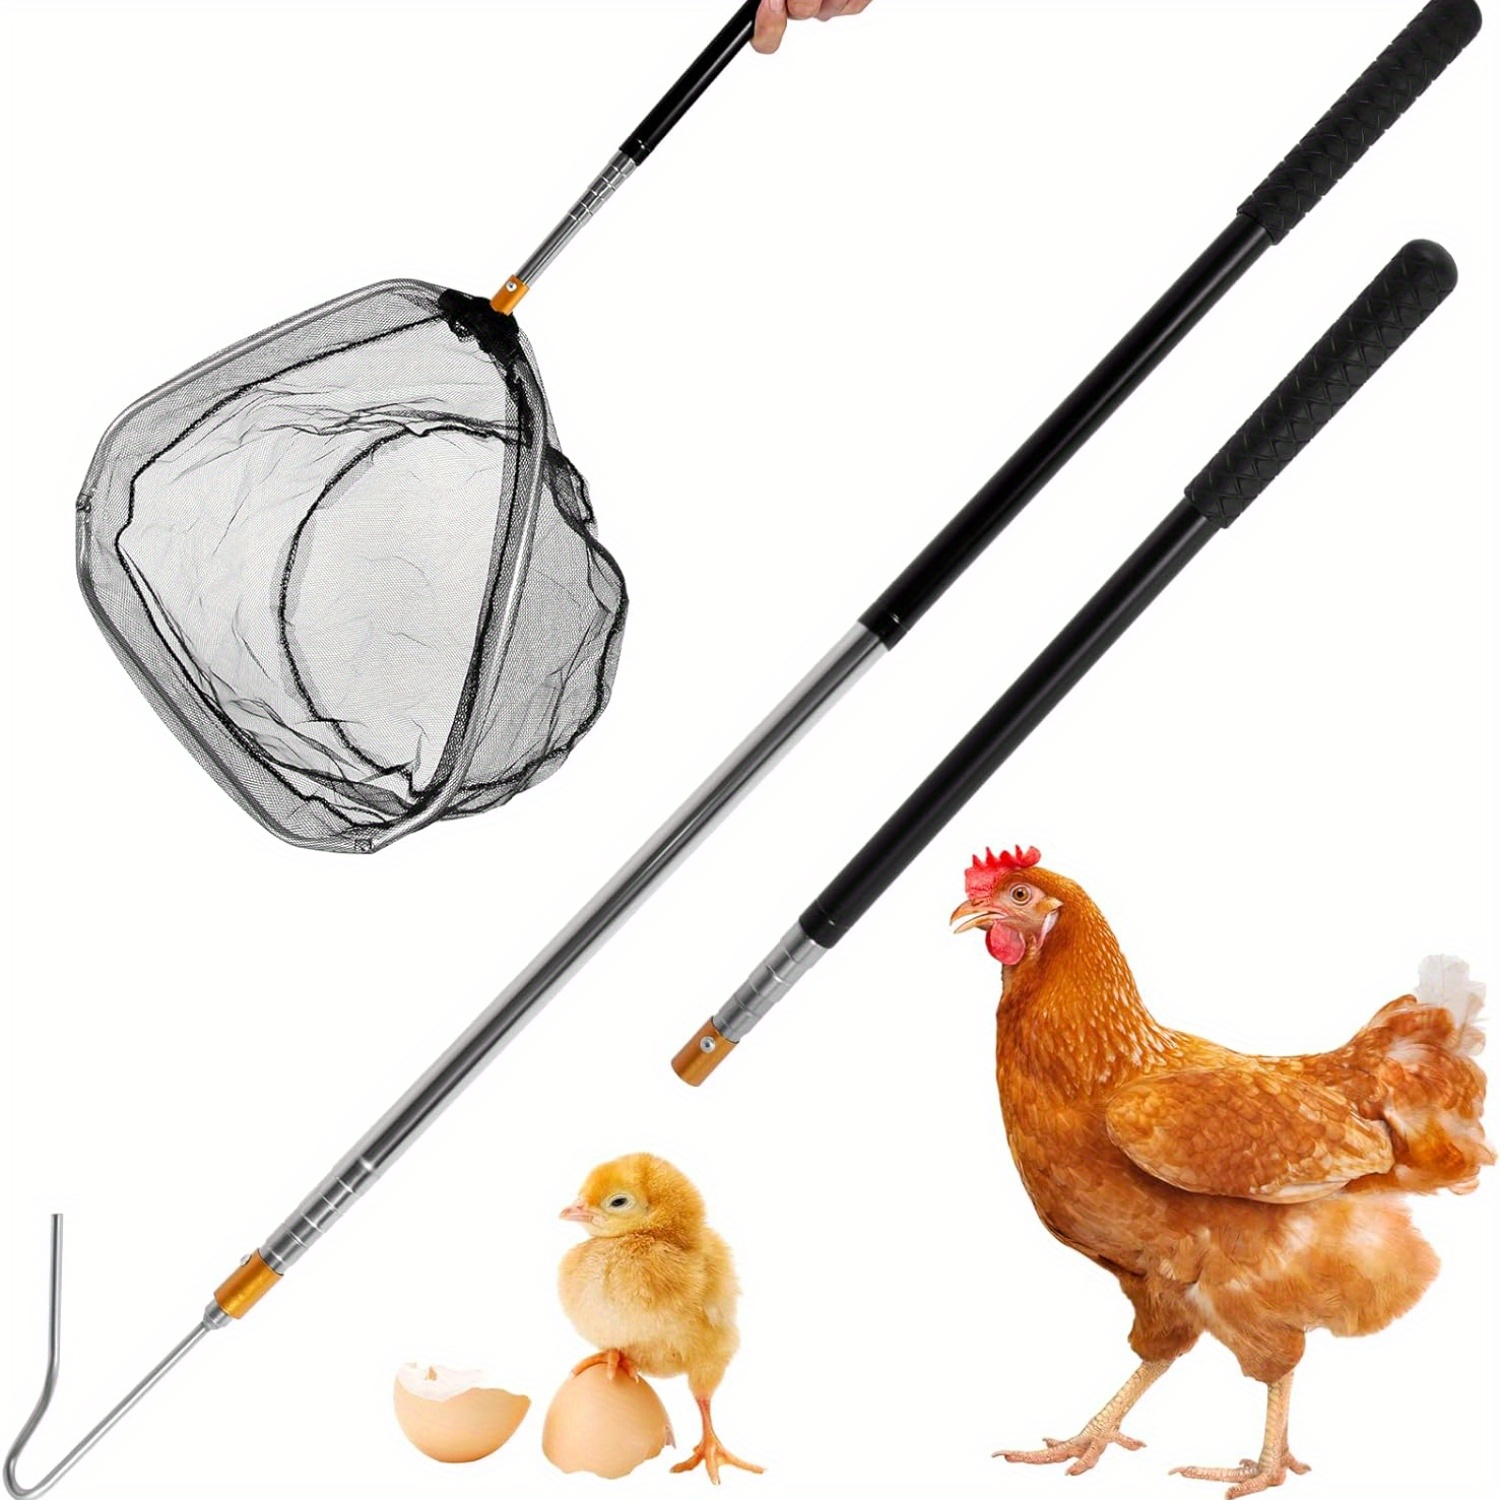 Stainless Steel Poultry Hook Manufacturer from Nashik